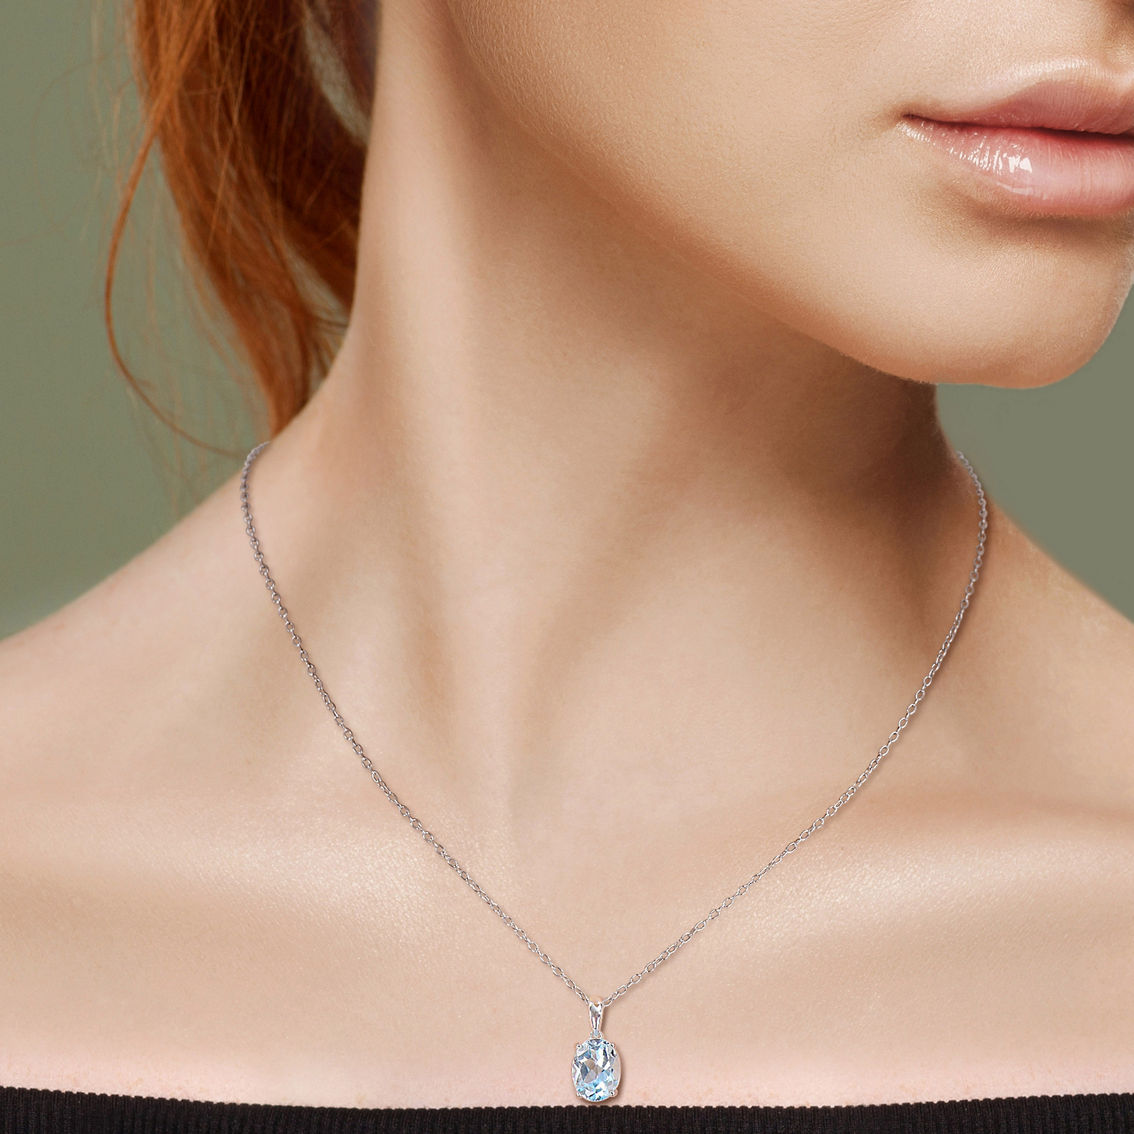 Sofia B. Sterling Silver Oval Blue Topaz Solitaire Pendant with Heart Design - Image 4 of 4